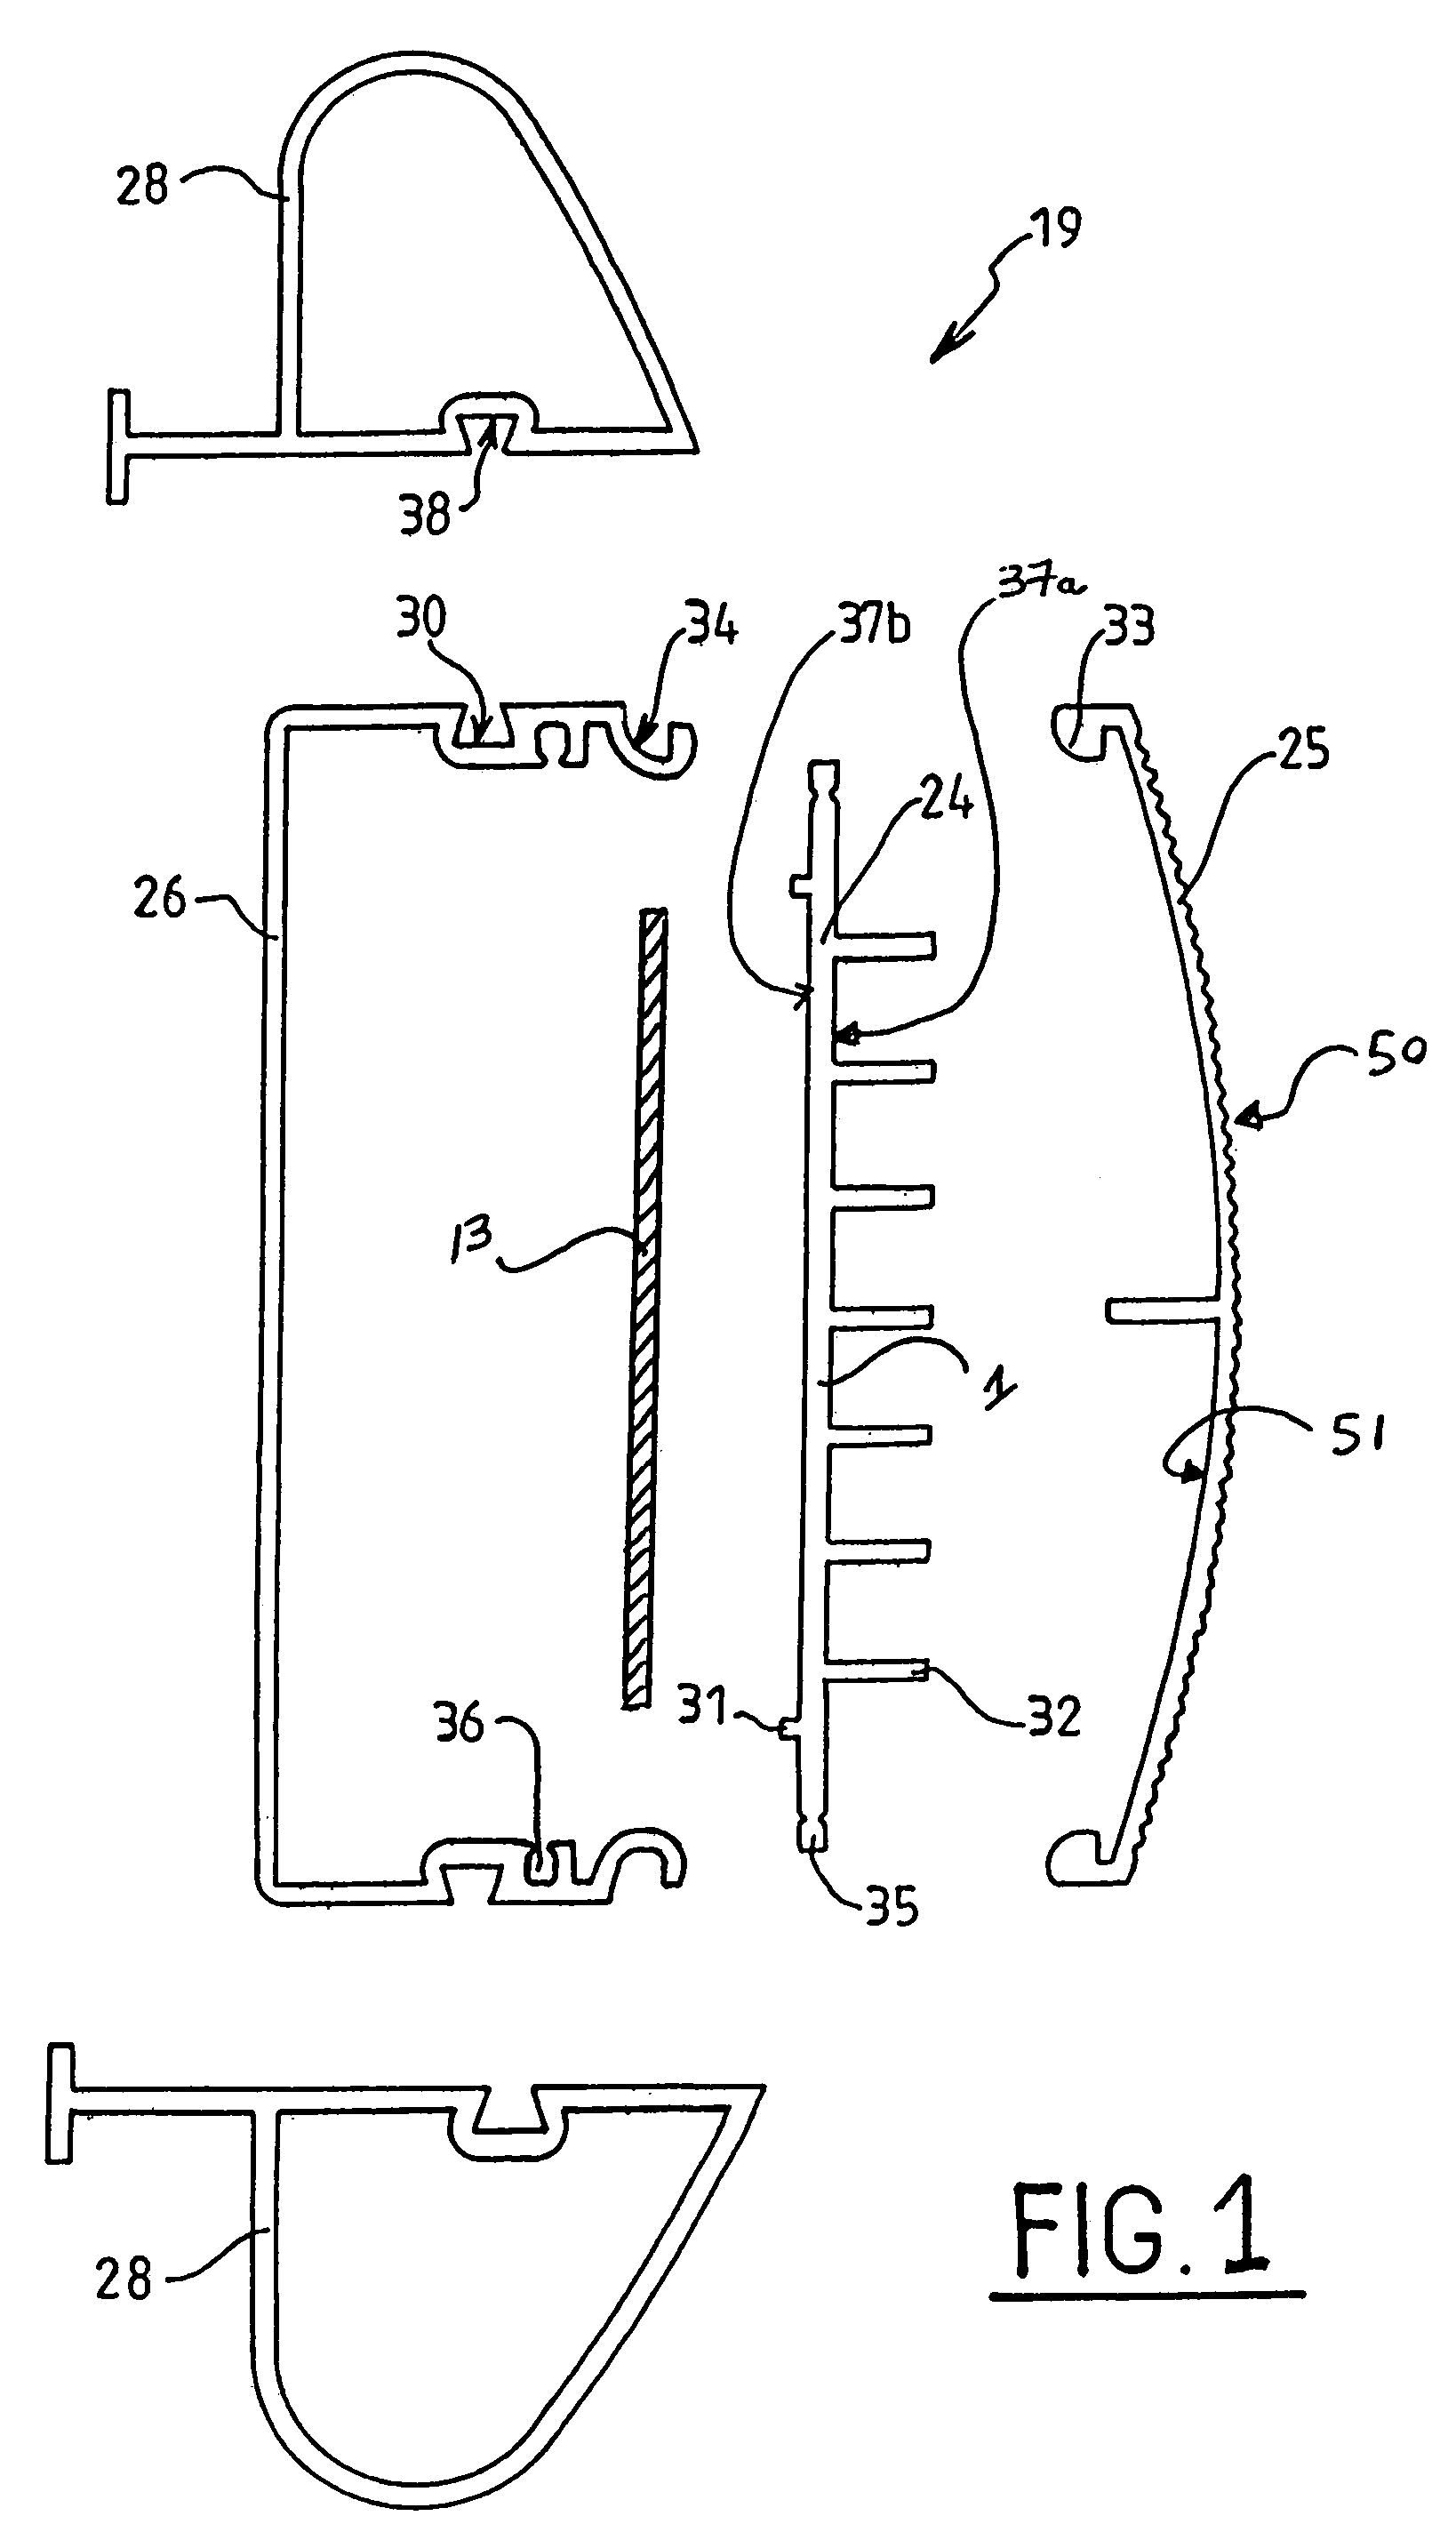 Temperature exchanging element made by extrusion and incorporating an infrared radiation diffuser